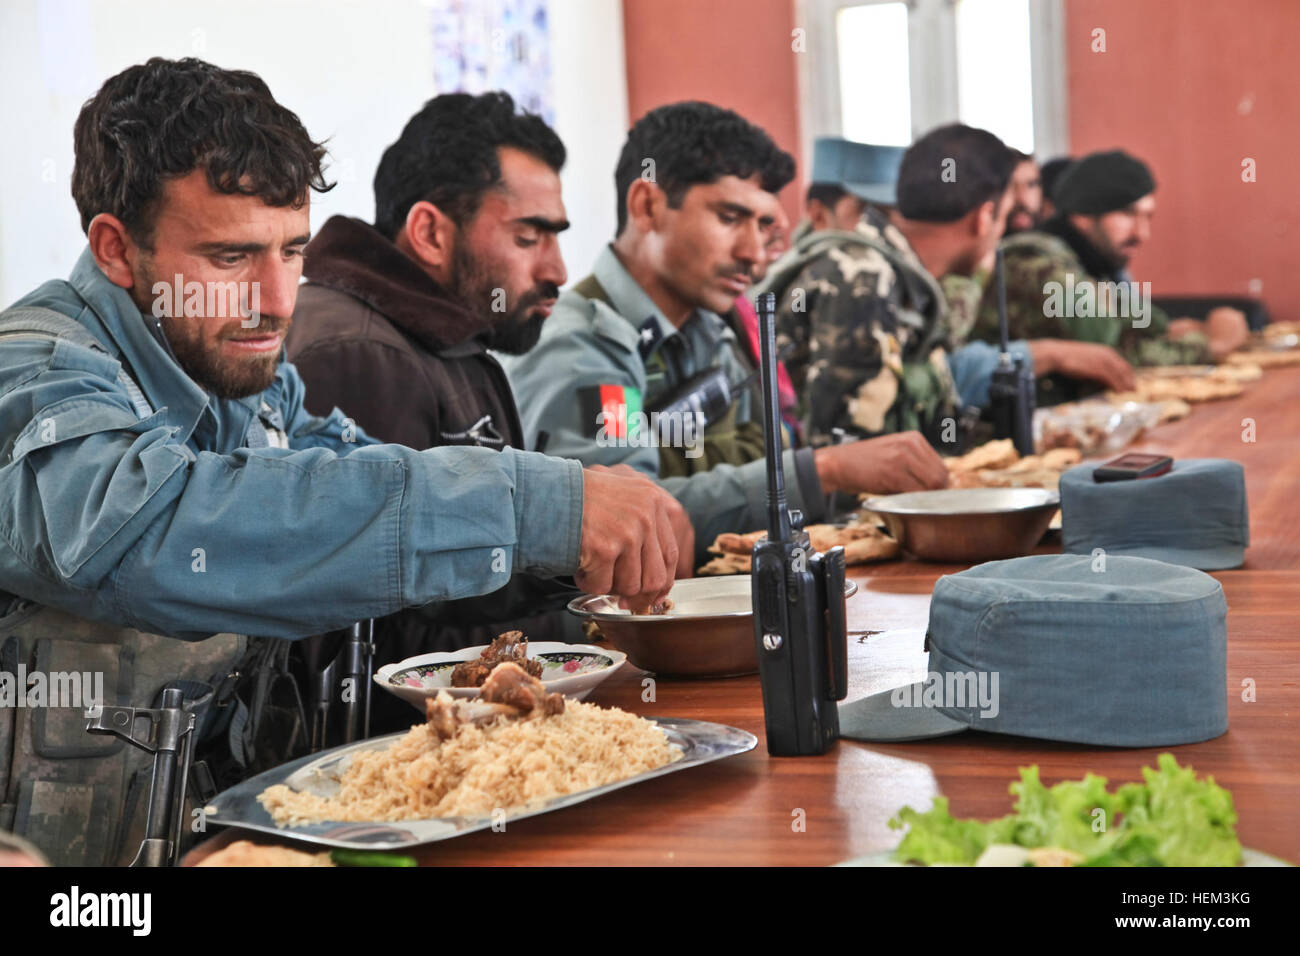 Members of the Afghan Uniformed Police eat lunch with soldiers of the Afghan National Army, Nazyan district, Nangarhar province, Afghanistan, March 15, 2012. The purpose of the mission was to gain familiarization of the district and key leadership. Key leader engagement 120315-A-LP603-120 Stock Photo